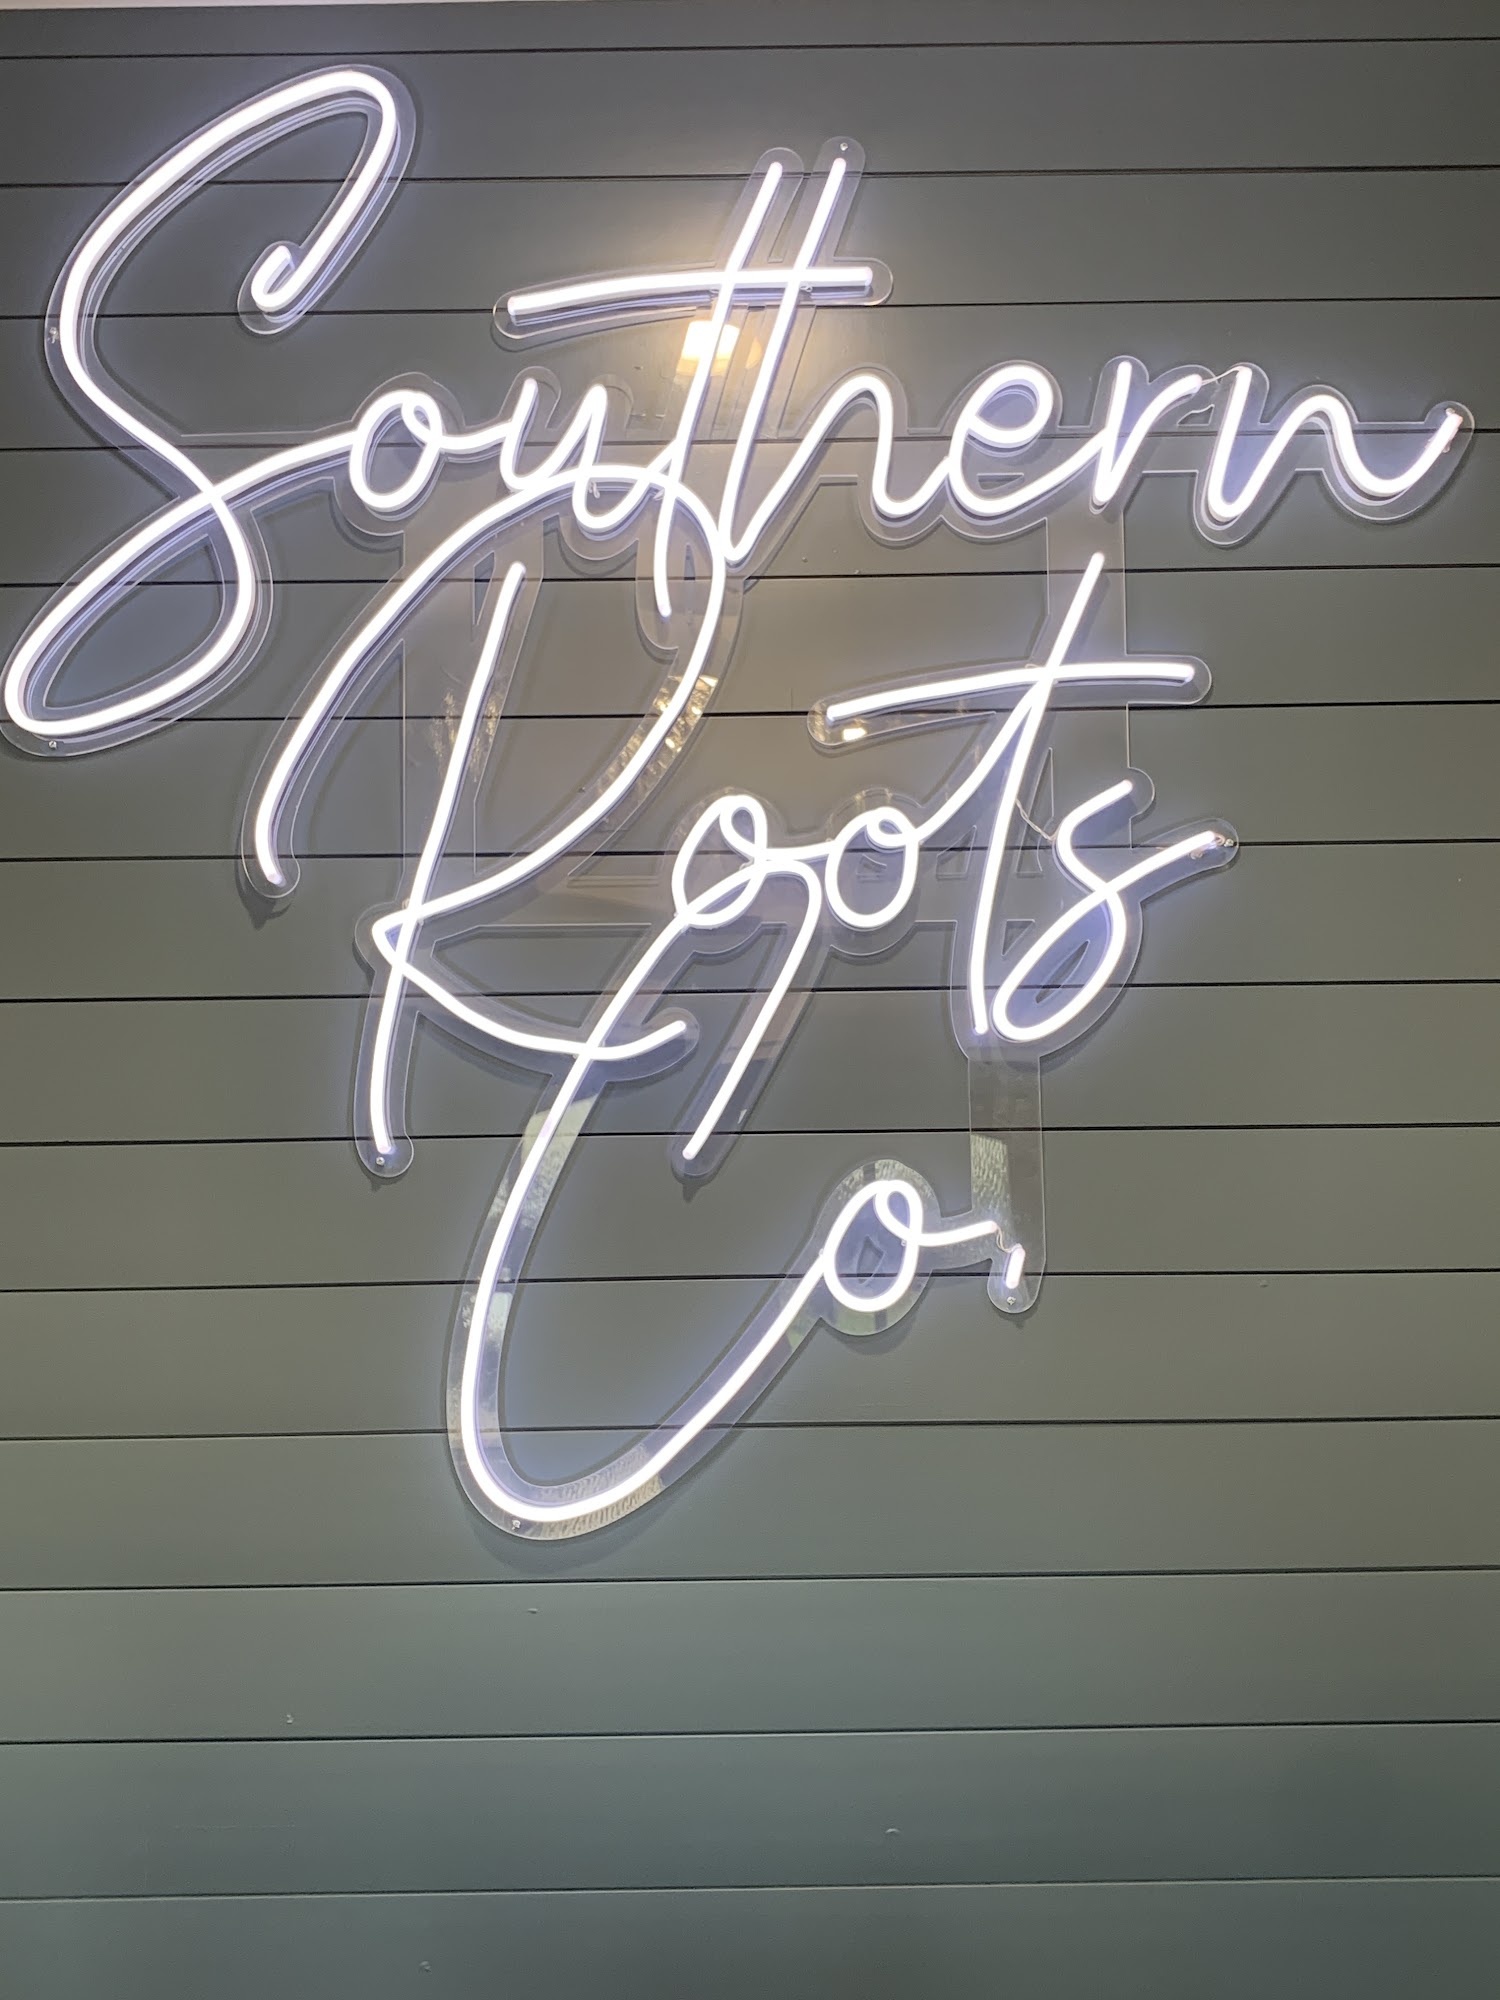 Southern roots co. 159 Co Rd 1515, Warren Texas 77664